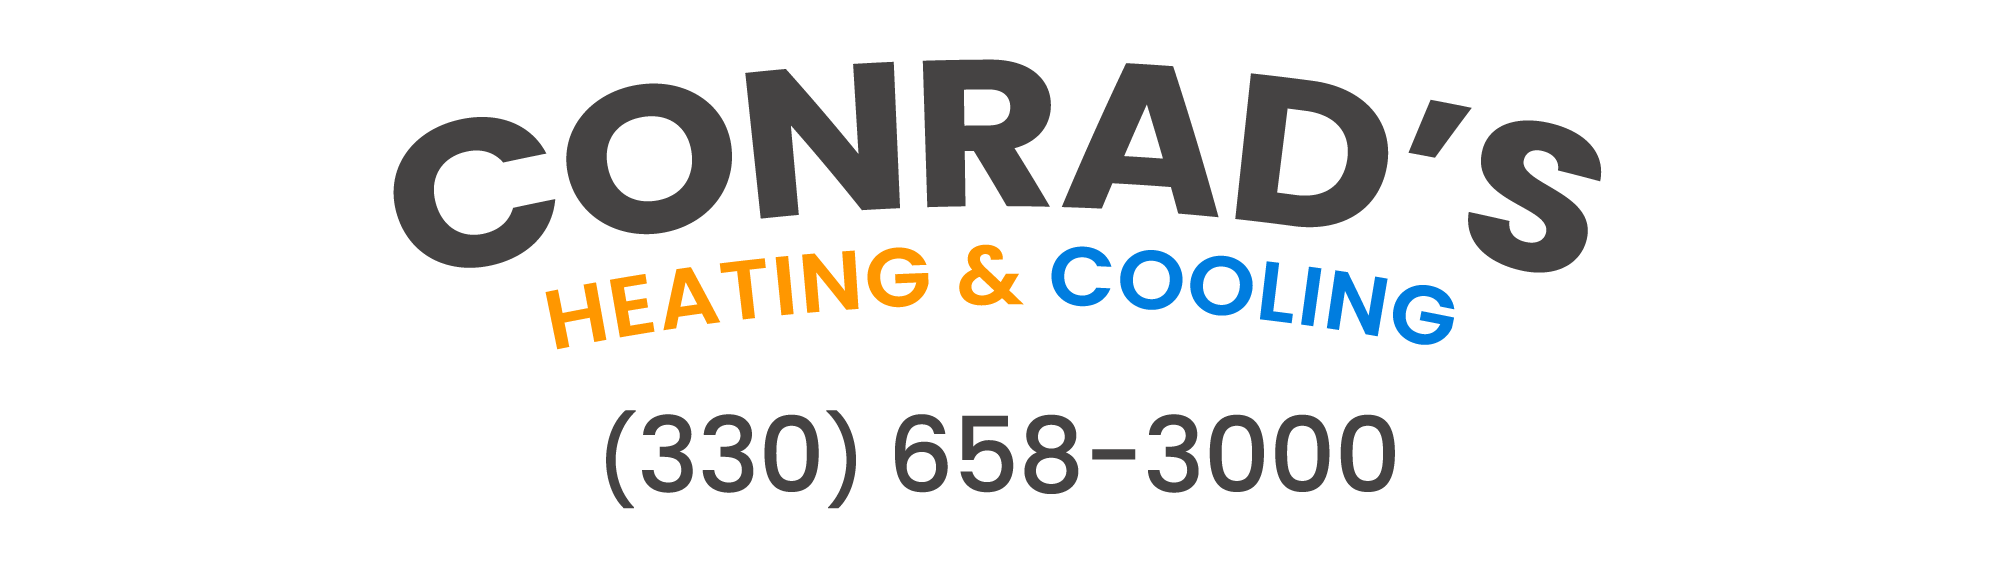 Conrad's Heating & Cooling